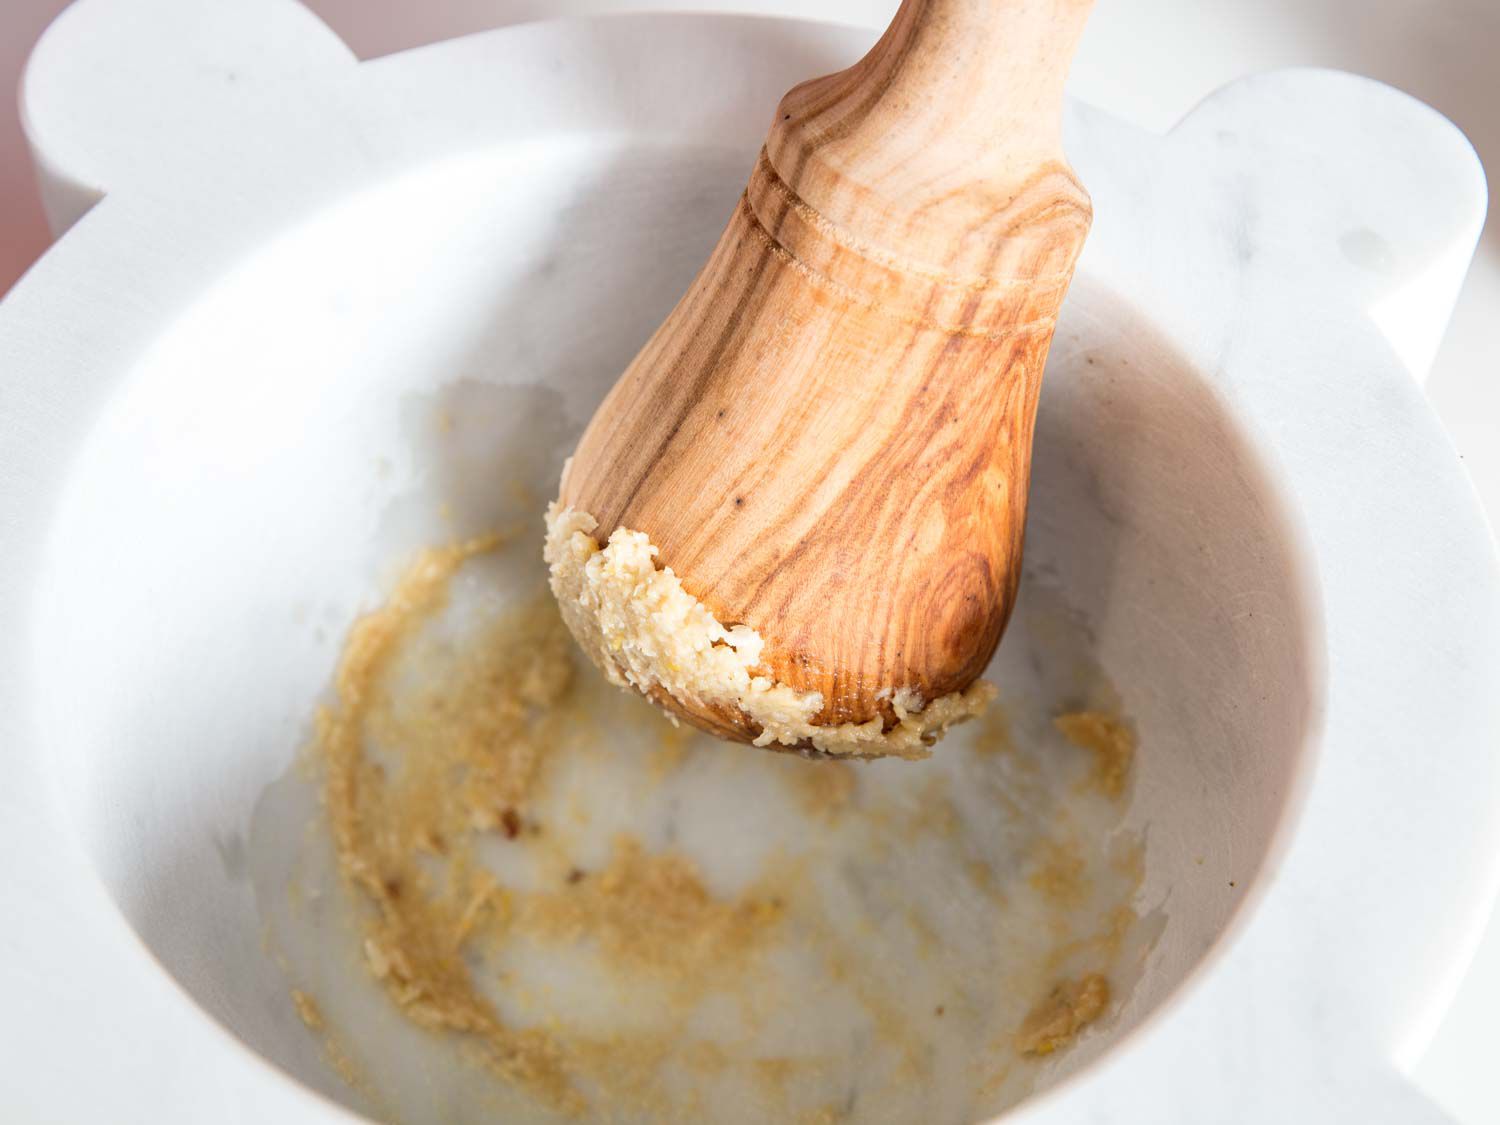 Pounding garlic to a paste using a marble mortar and wooden pestle.